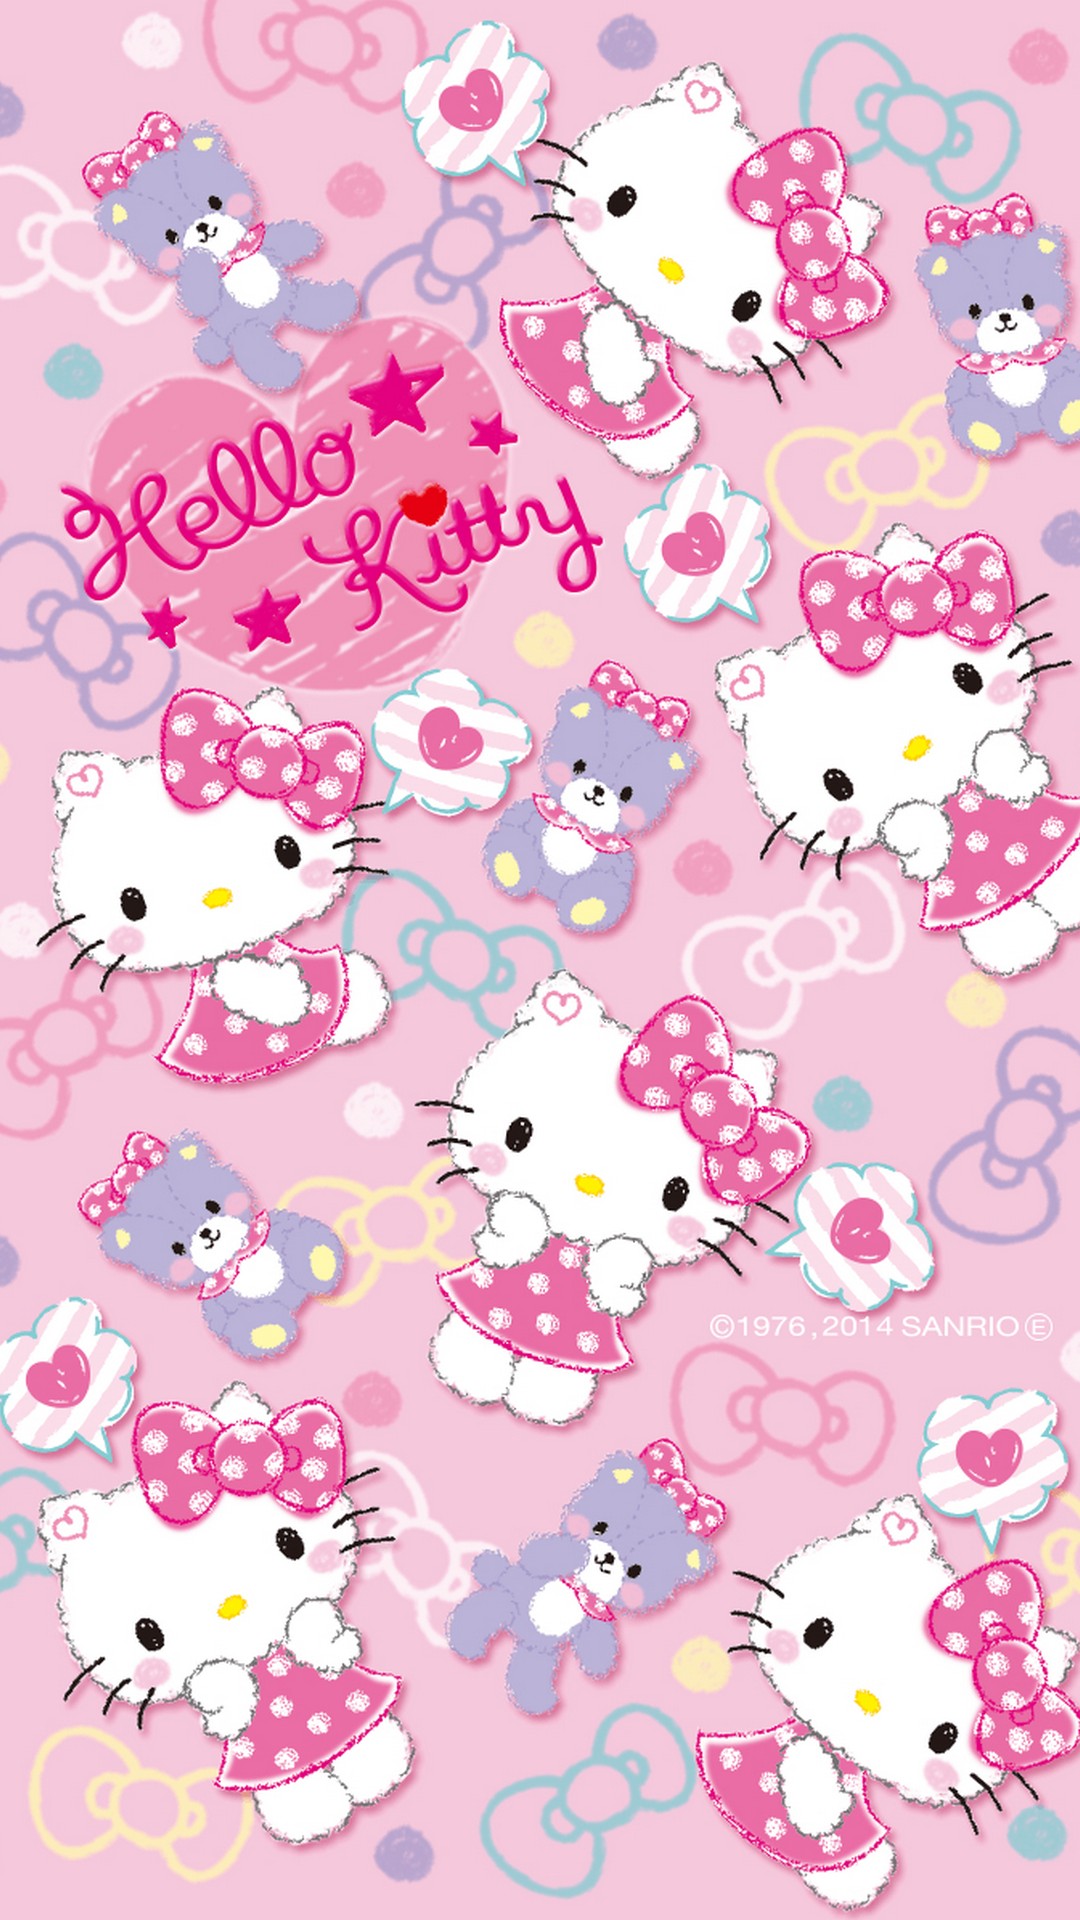 Android Wallpaper HD Hello Kitty Characters with resolution 1080X1920 pixel. You can make this wallpaper for your Android backgrounds, Tablet, Smartphones Screensavers and Mobile Phone Lock Screen